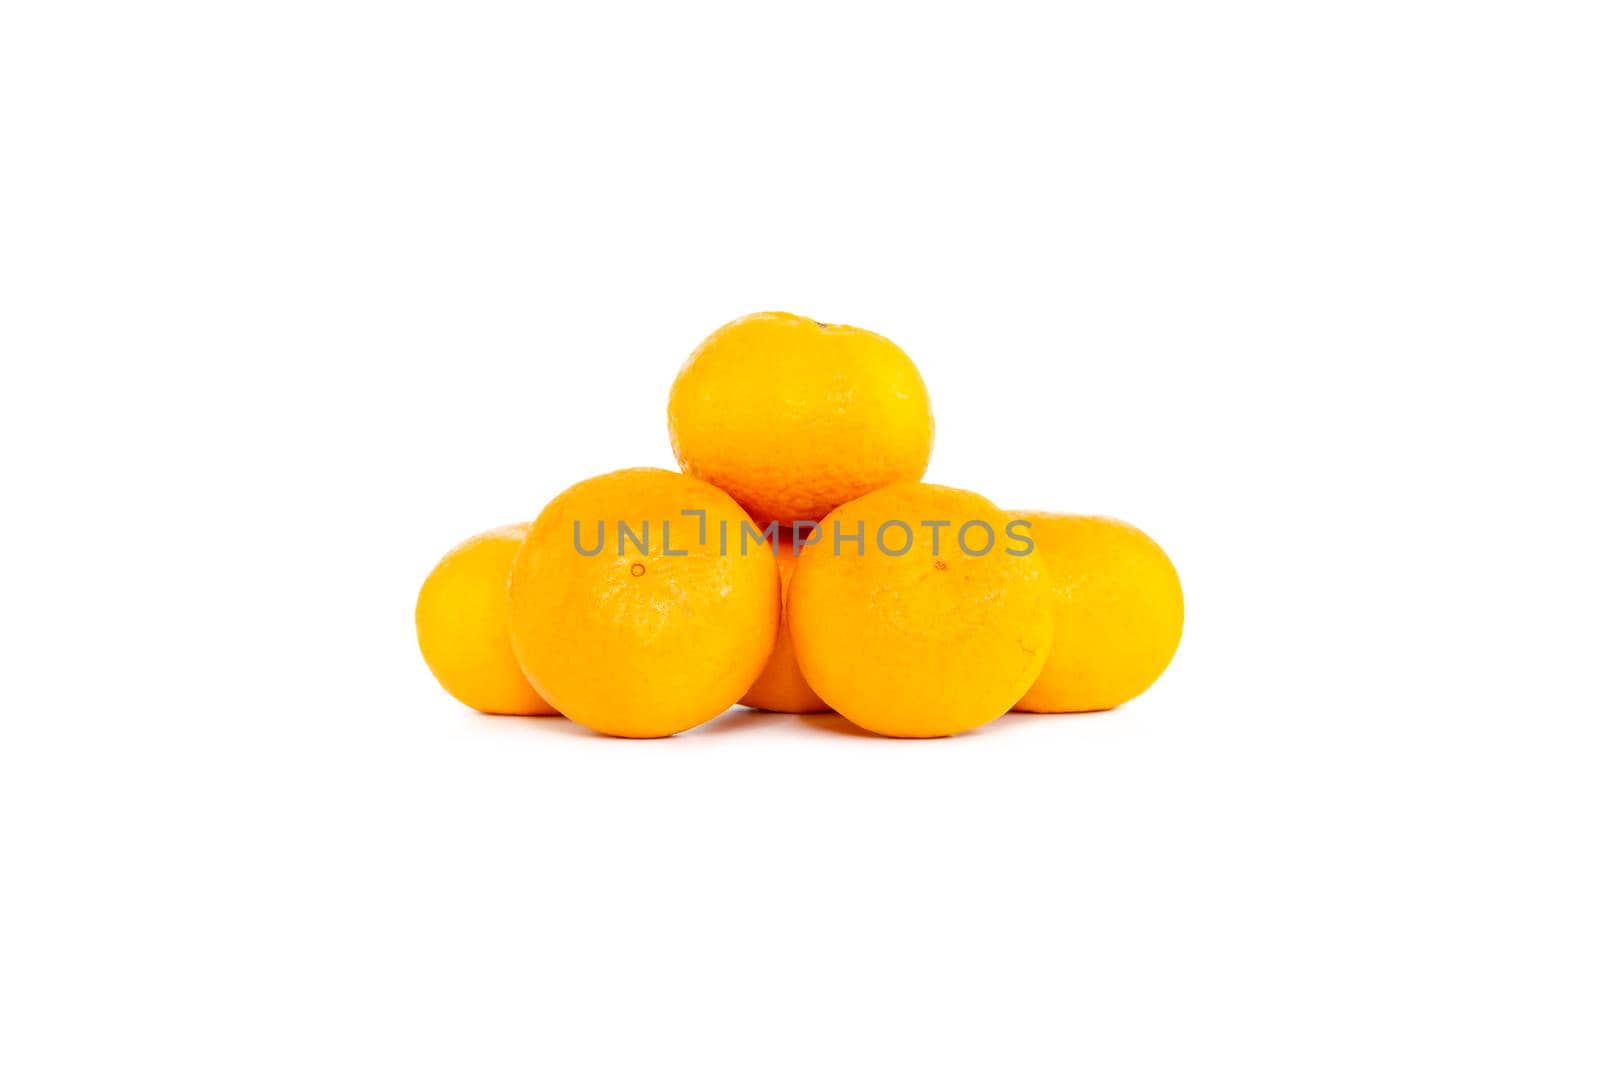 Group of oranges or tangerine isolated on white background